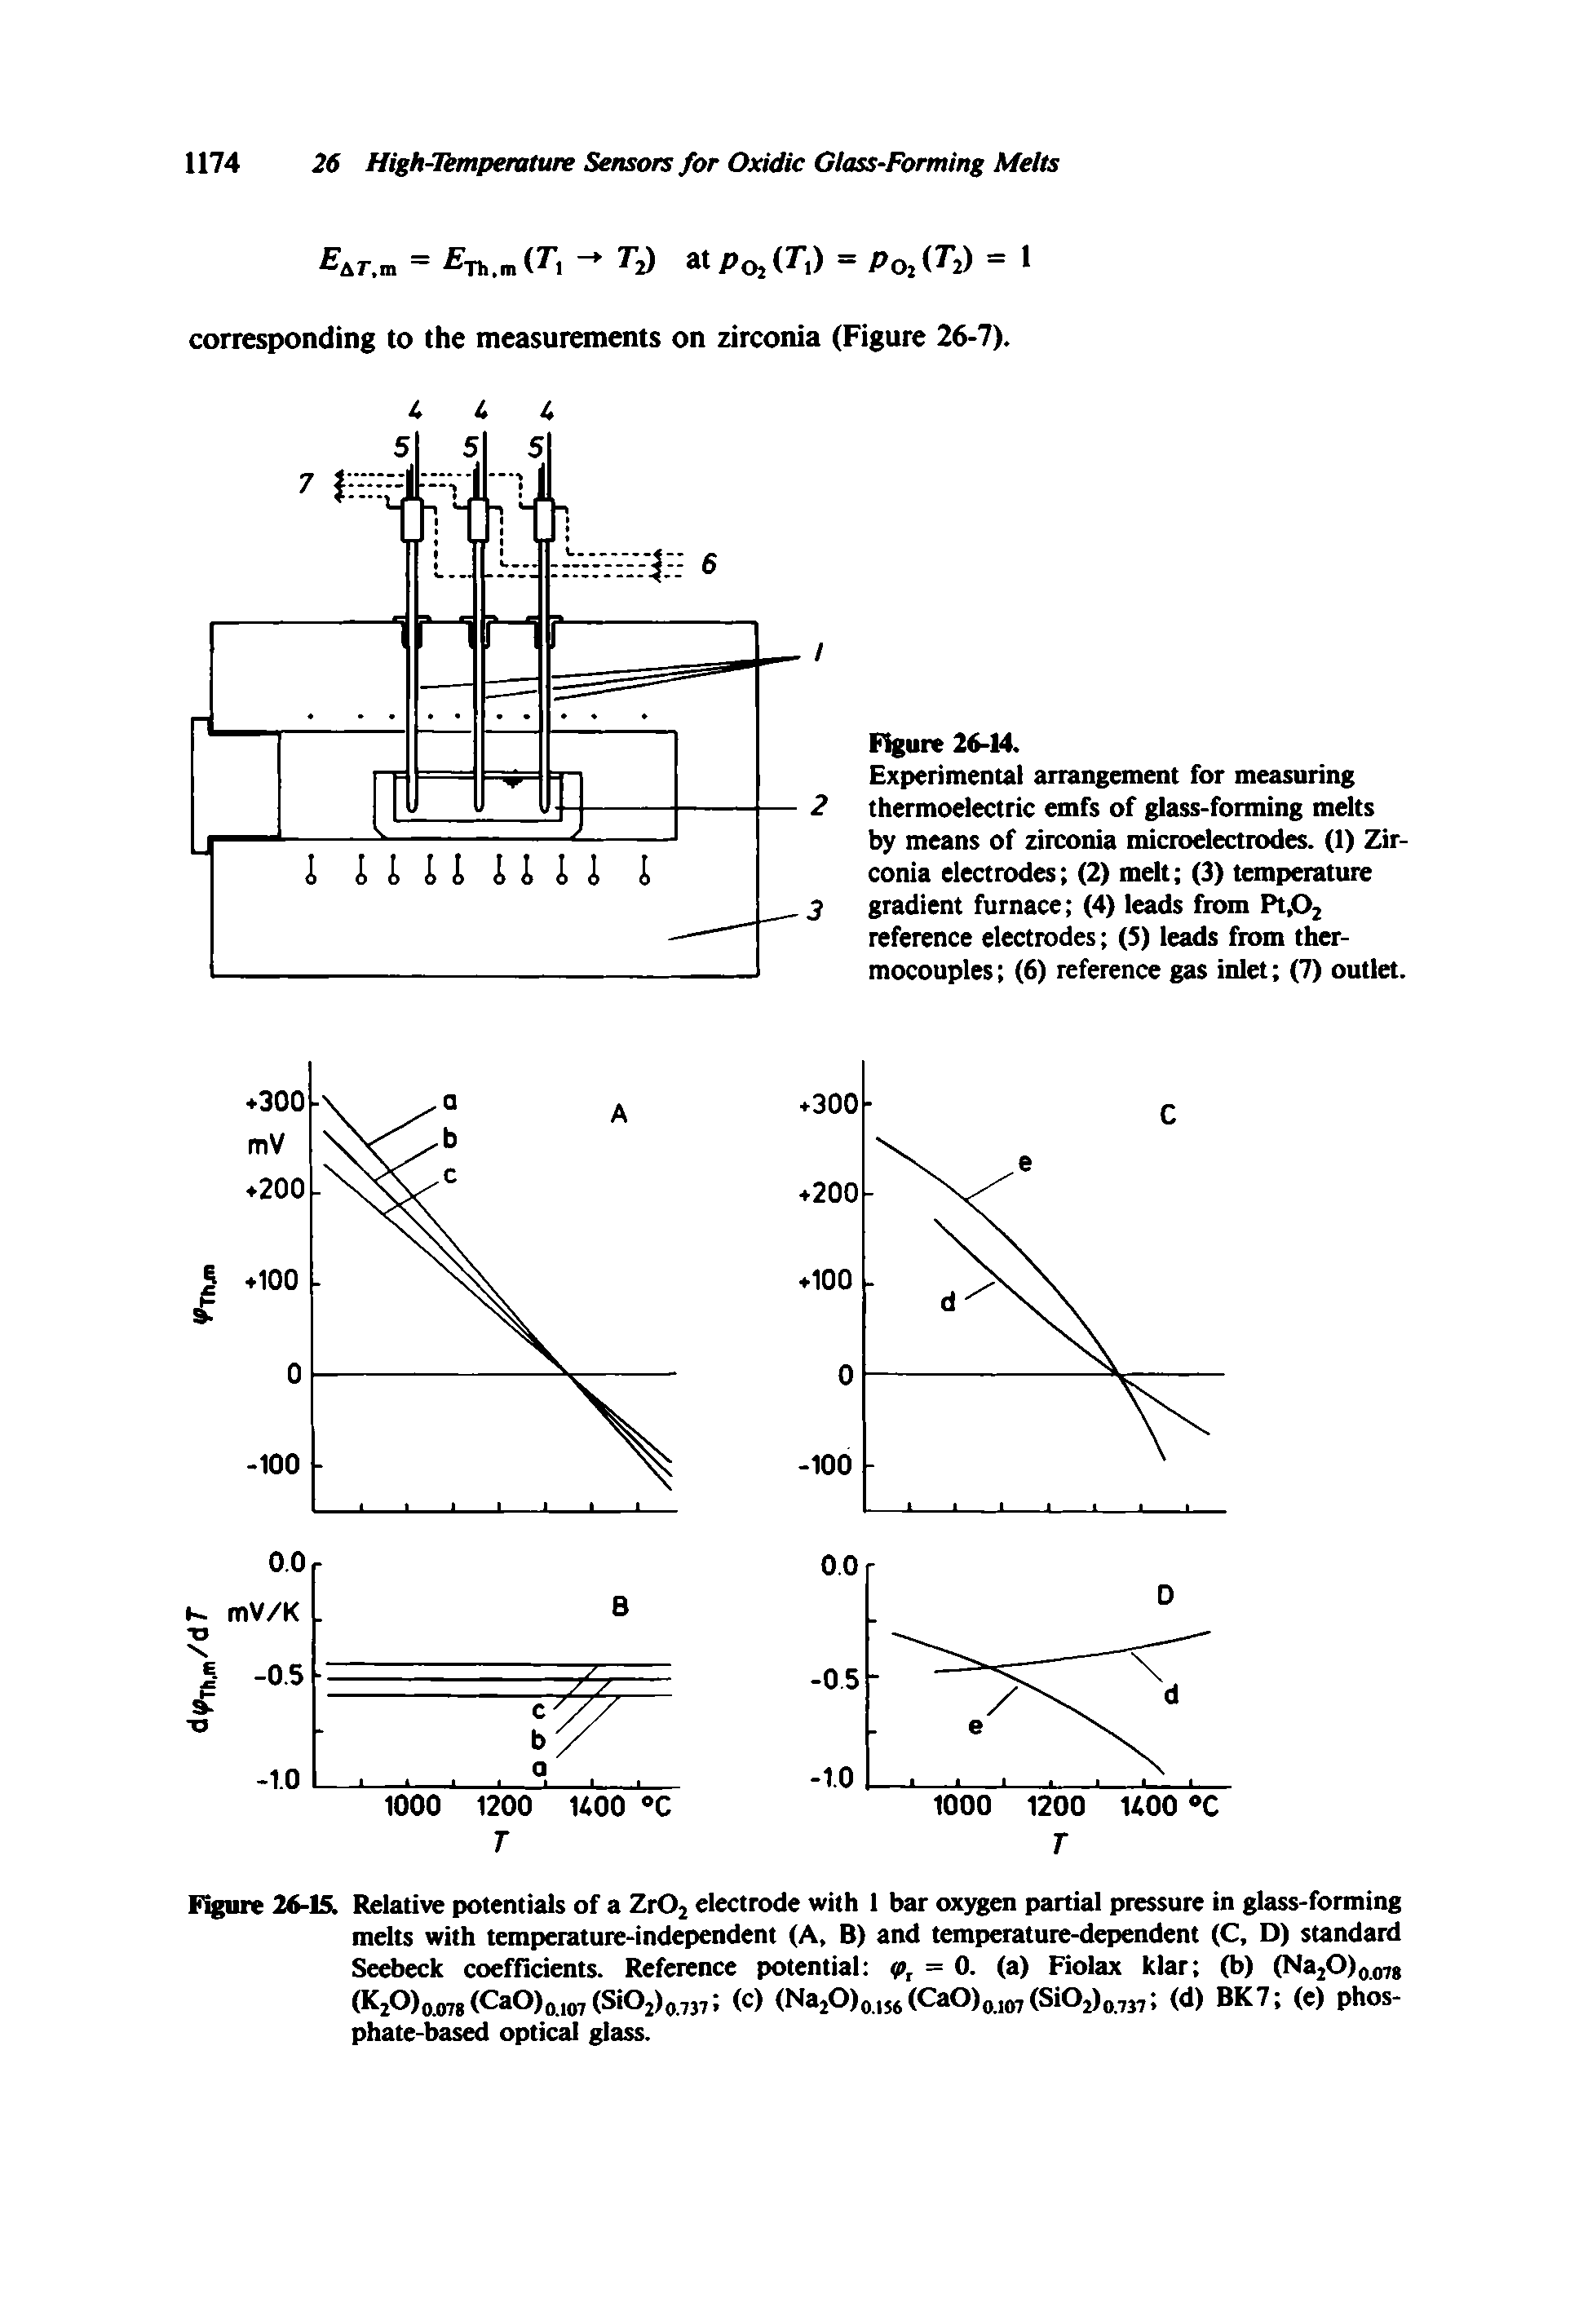 Figure 26-15. Relative potentials of a Zr02 electrode with 1 bar oxygen partial pressure in glass-forming melts with temperature-independent (A, B) and temperature-dependent (C, D) standard Seebeck coefficients. Reference potential 9, = 0. (a) Fiolax klar (b) (Na20)oo7 (K20)o 78(CaO)o, (Si02)o.737 (c) (Na20)o,s6(CaO)ojB7(Si02) .737 (d) BK7 (e) phos-phate-ba optical glass.